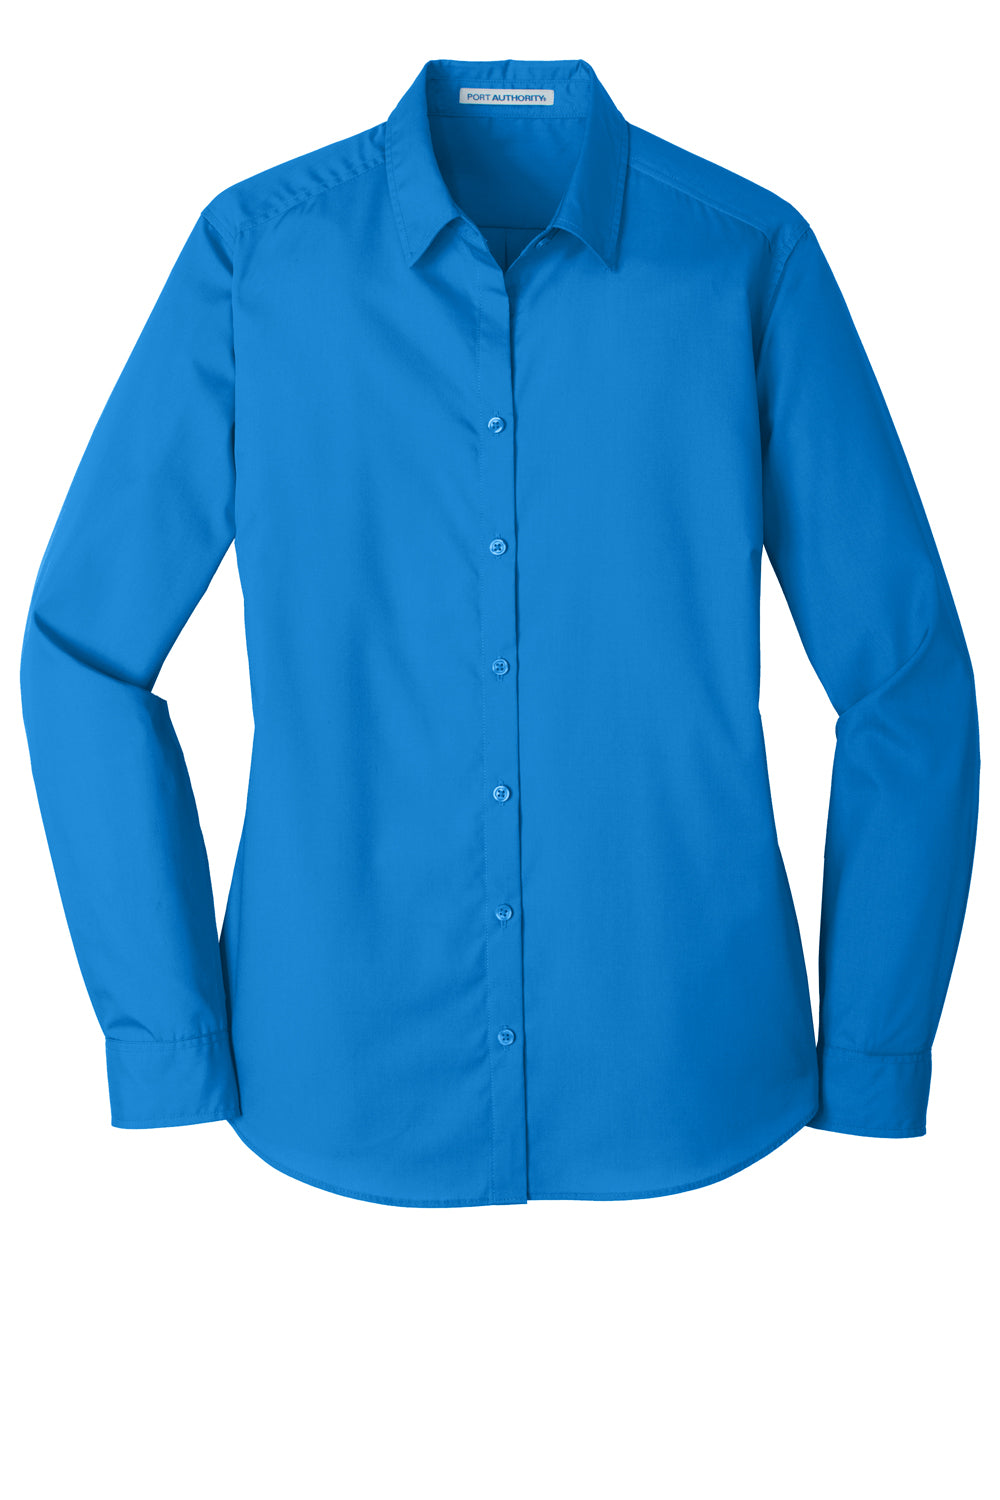 Port Authority LW100 Womens Carefree Stain Resistant Long Sleeve Button Down Shirt Coastal Blue Flat Front